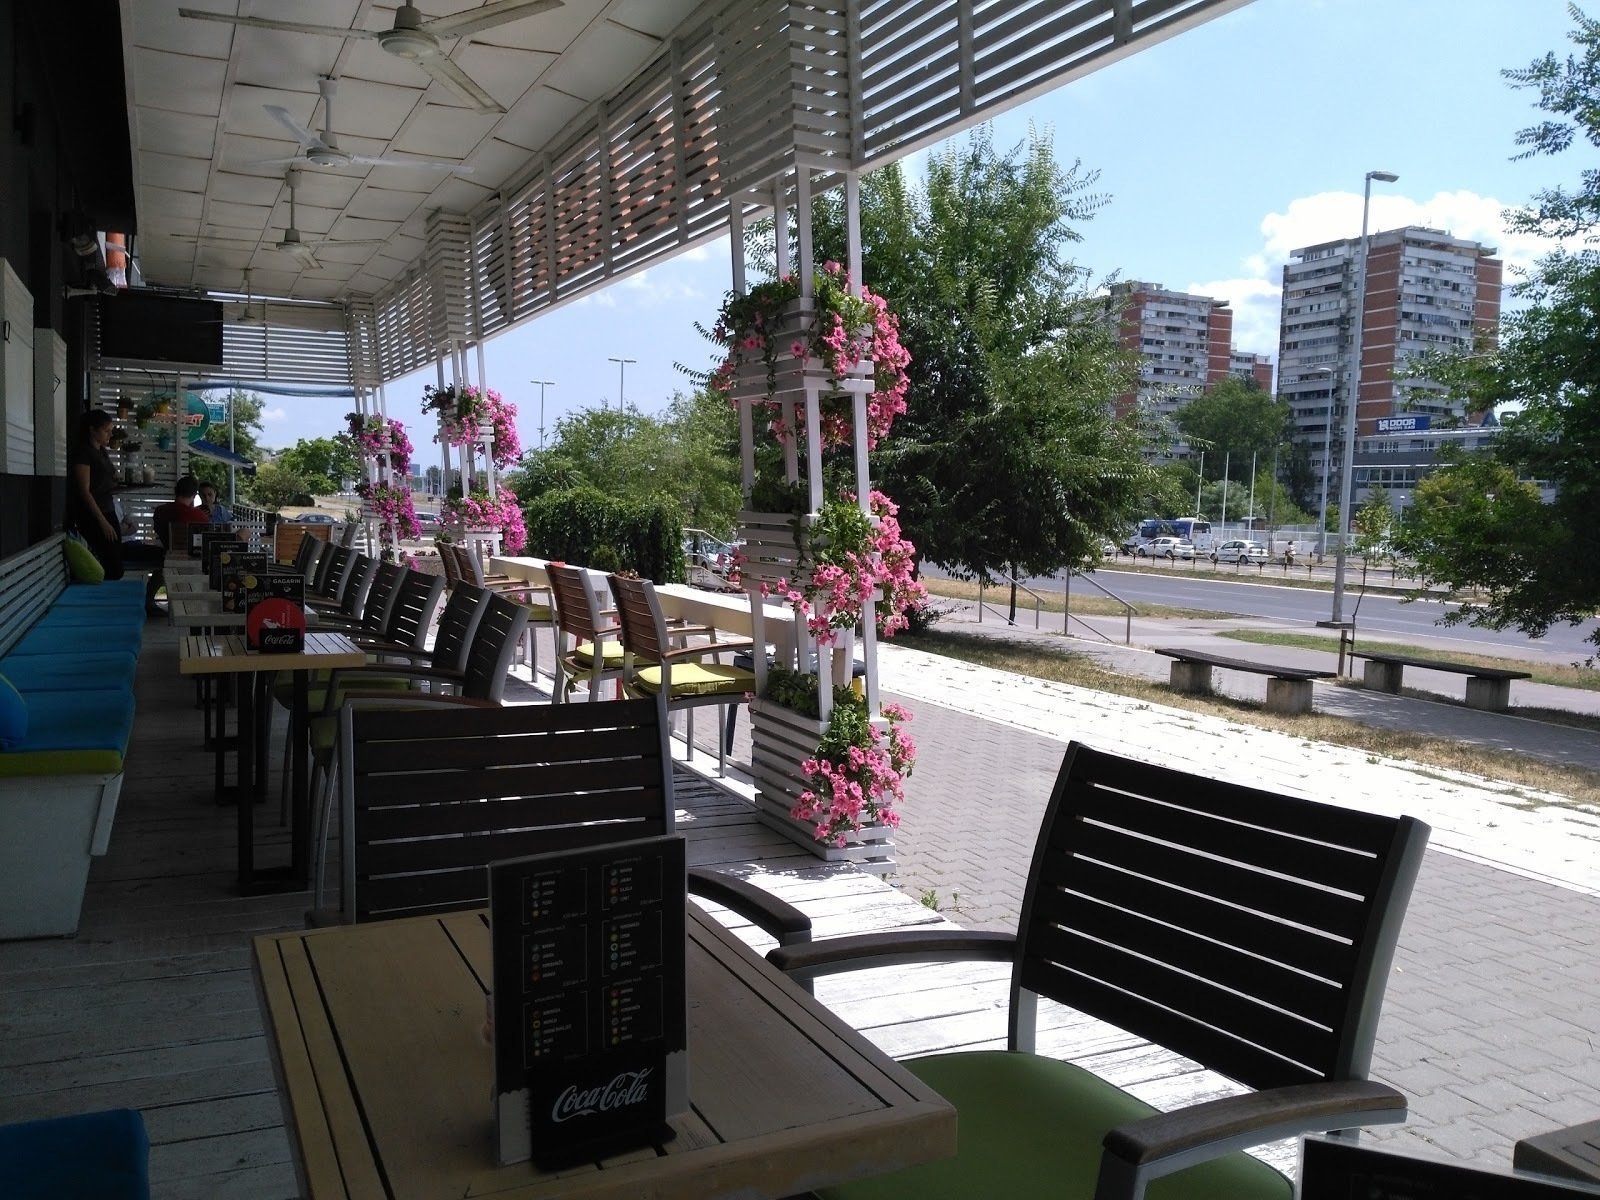 <span class="translation_missing" title="translation missing: en.meta.location_title, location_name: Gagarin cafe, city: Belgrade">Location Title</span>